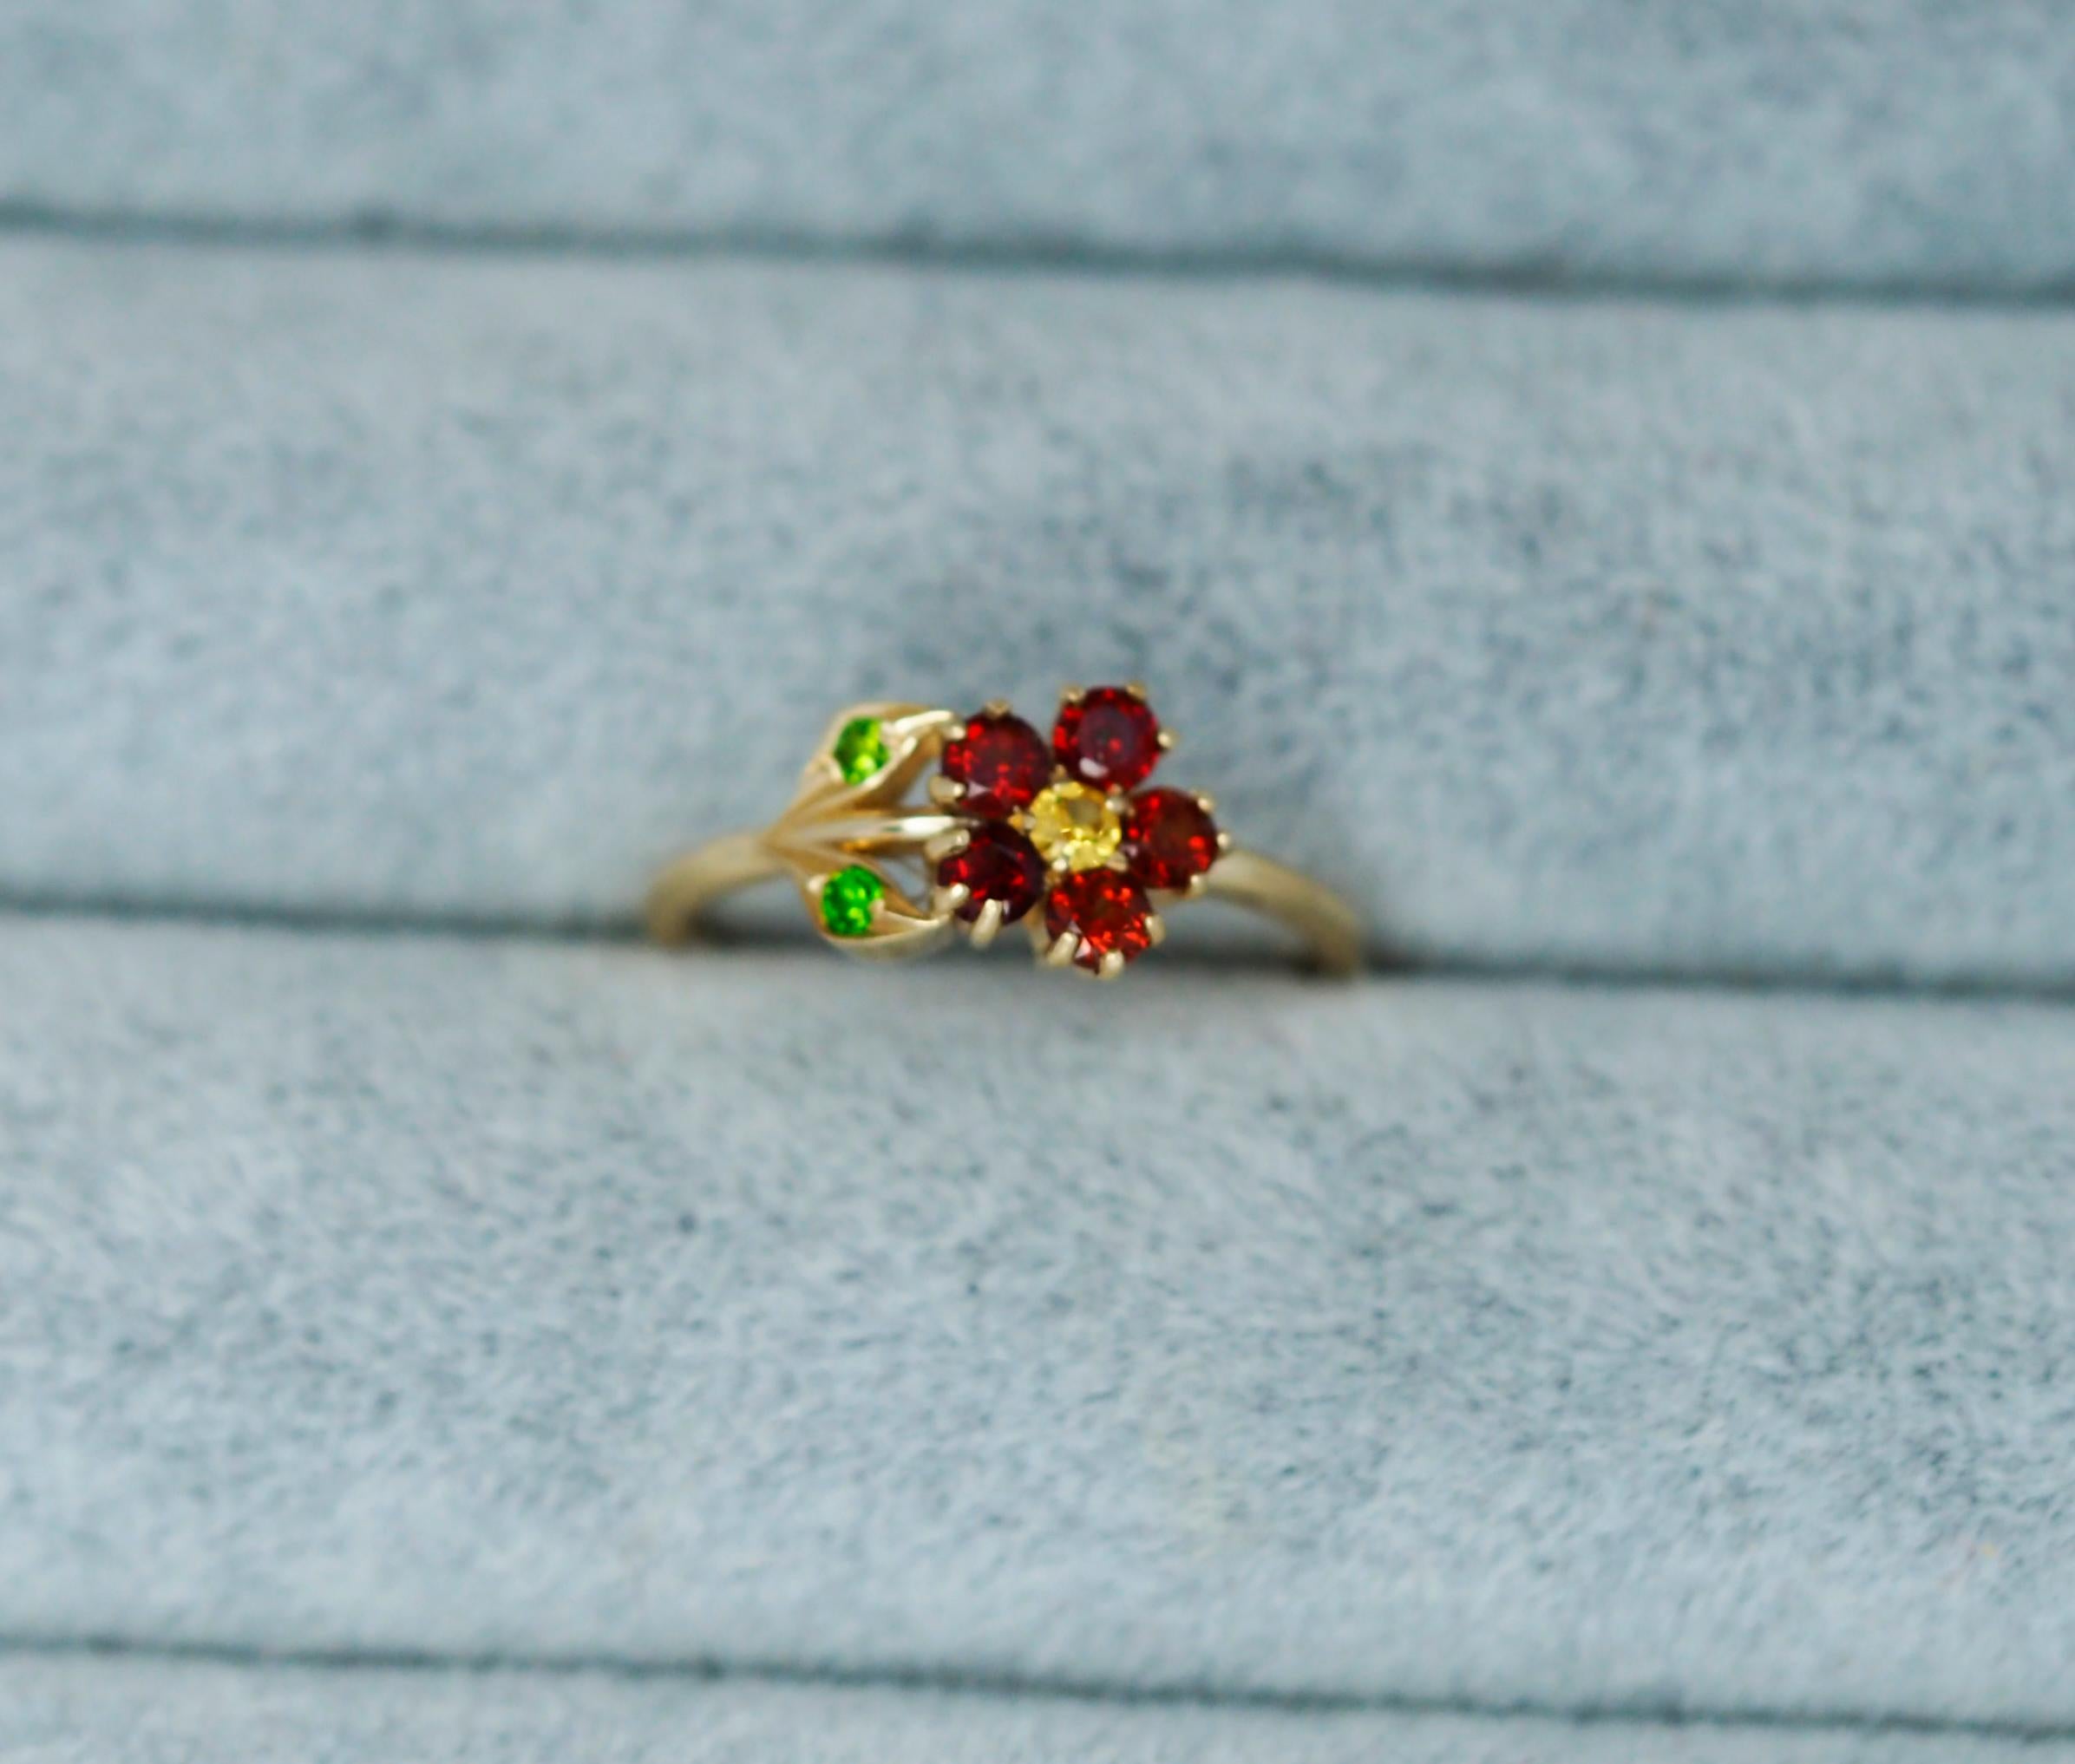 Flower Ring in 14 Karat Gold, Sapphire, Garnet and Chrome Diopsides Ring. 
Floral design gold ring. Young girl ring. Danity flower ring.

Material: 14 karat gold (you can choose color)
Weight: 1.40 g. (depends from size)
Set with sapphire:
Round